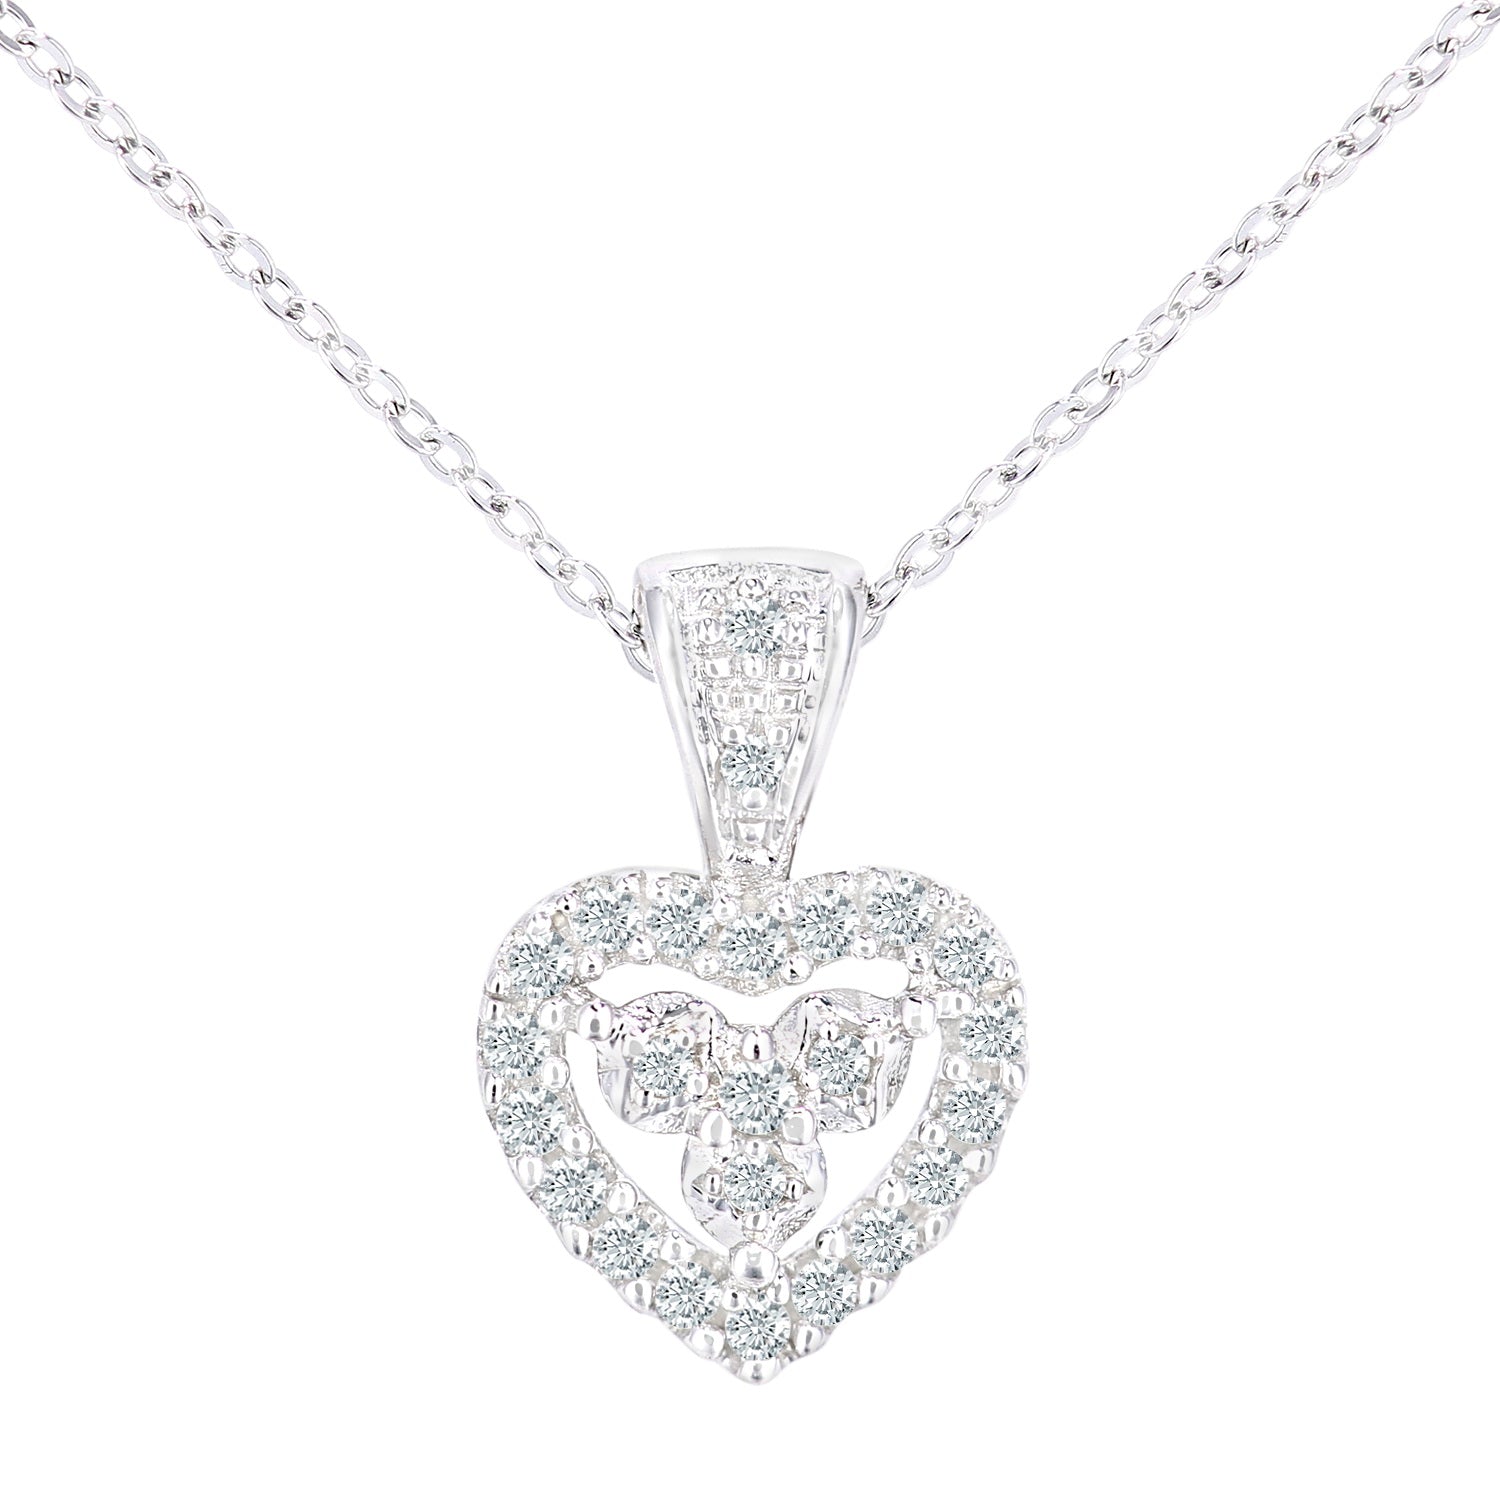 9ct White Gold  Round 12pts Diamond Heart Pendant Necklace 18 inch - PP0AXL5928W